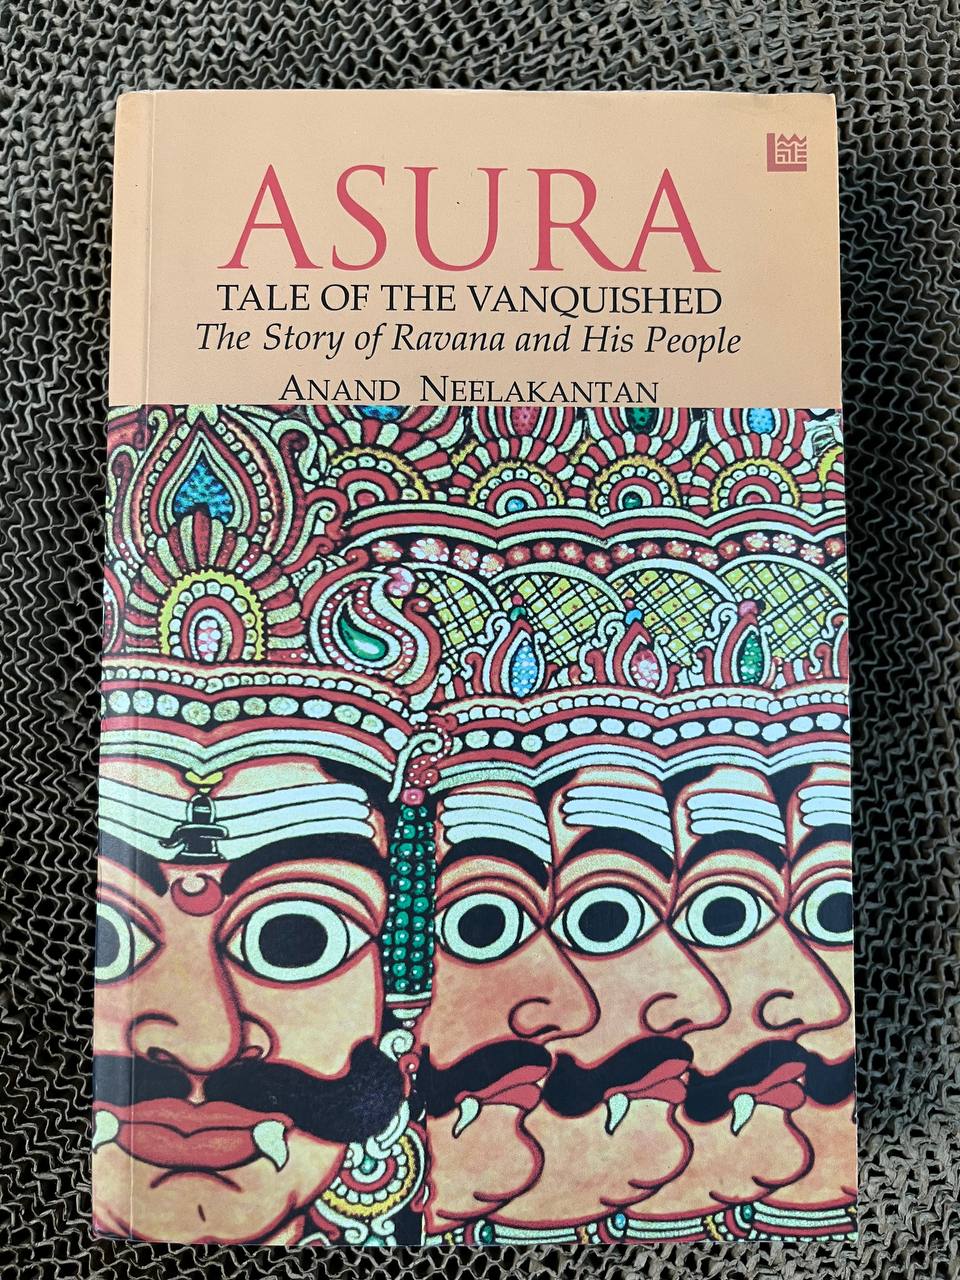 Asura tale of the vanquished book